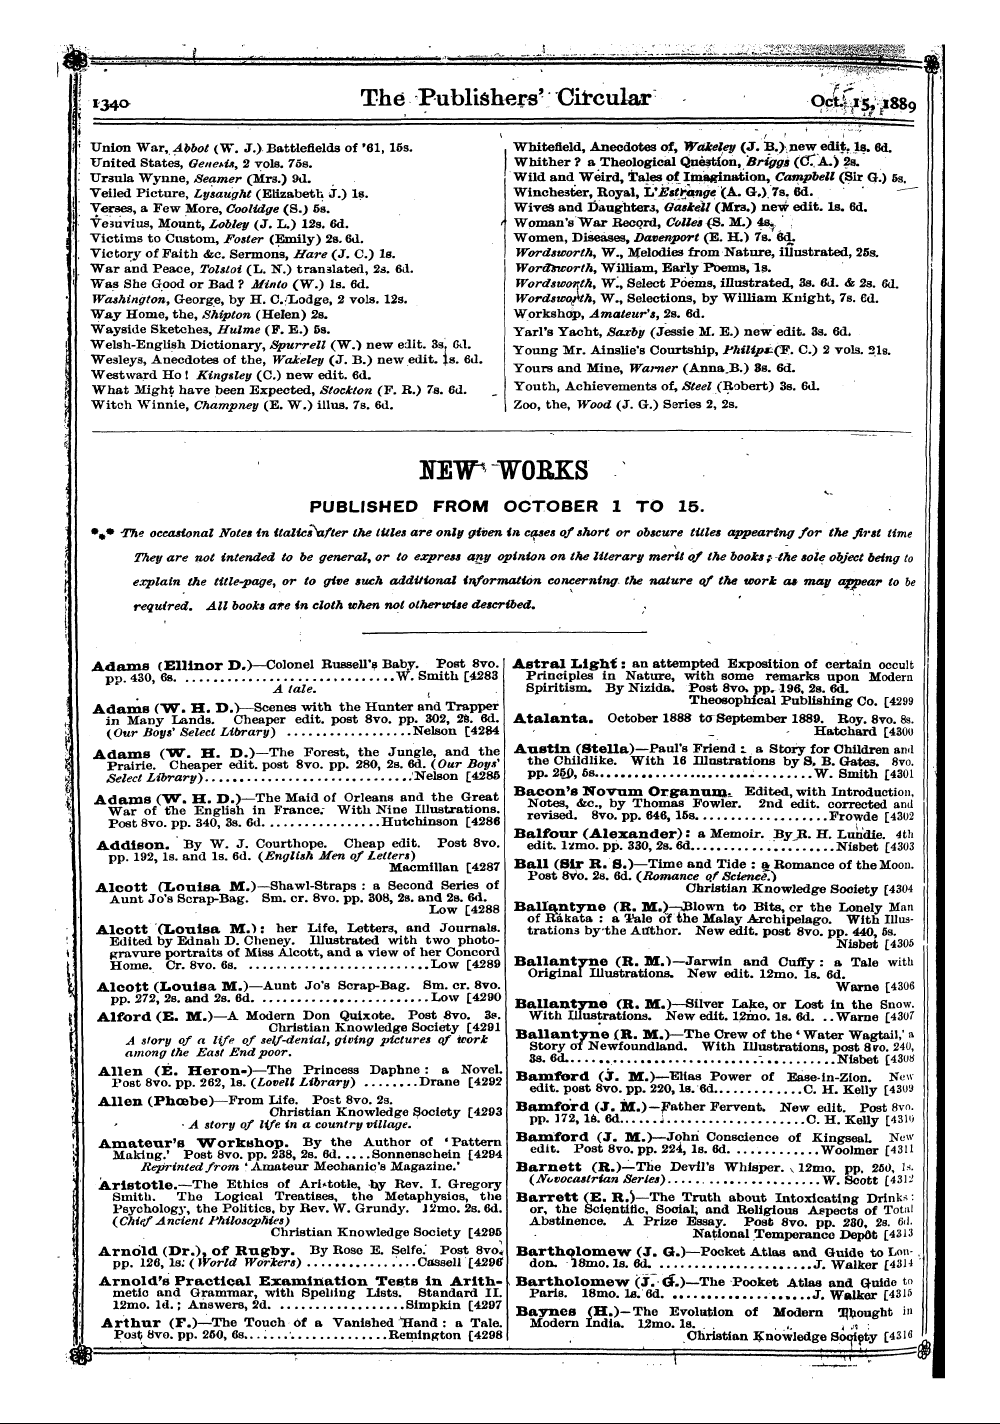 Publishers’ Circular (1880-1890): jS F Y, 1st edition - A. B. L., Lig H T In Darkness, 9d.